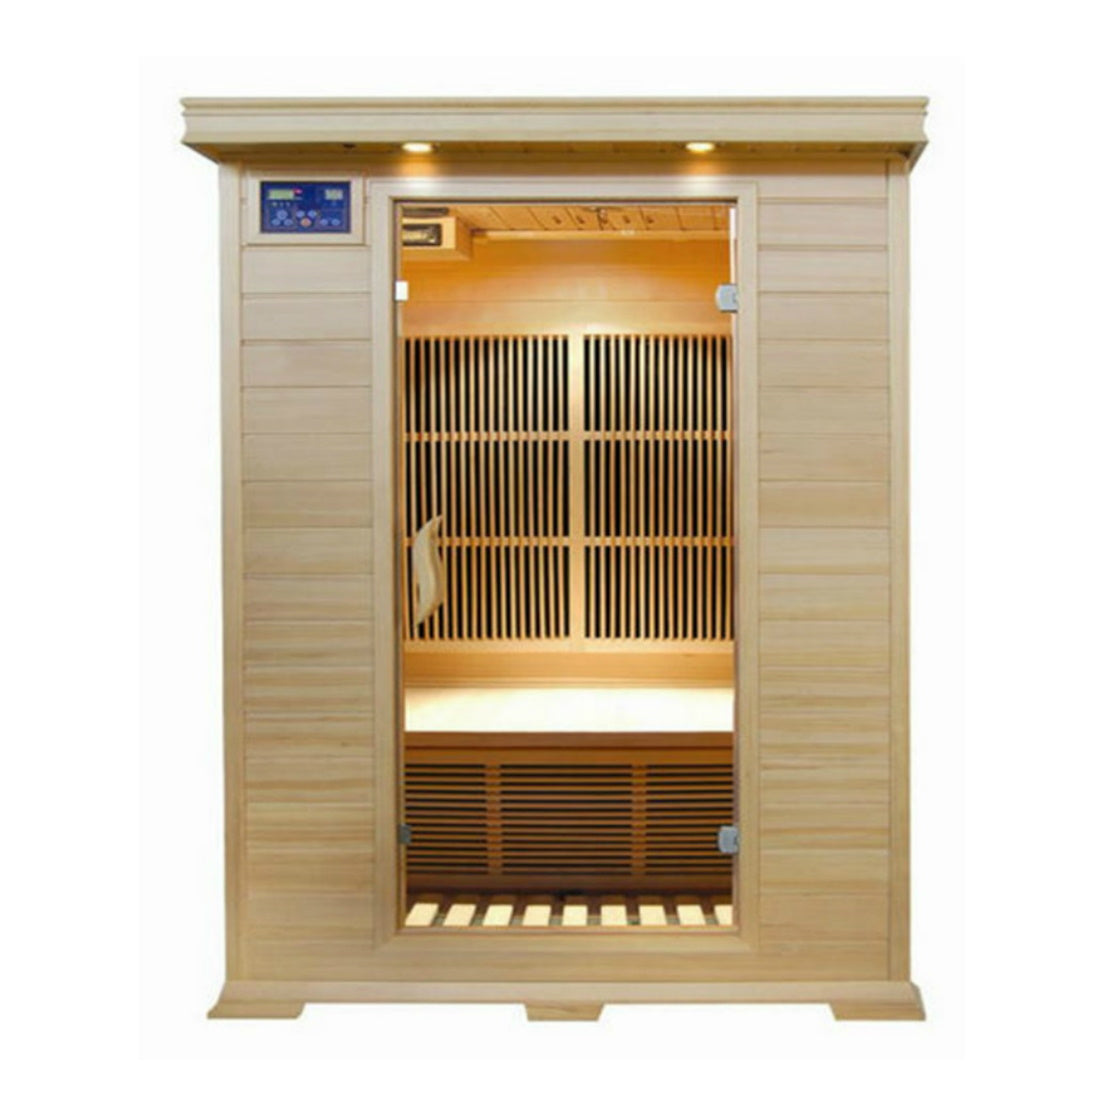 SunRay Evansport 2-Person Indoor Infrared Sauna - Natural Canadian Hemlock with glass door, 7 infrared carbon nano heaters, Dual LED control panels, Recessed exterior lighting - HL200K2